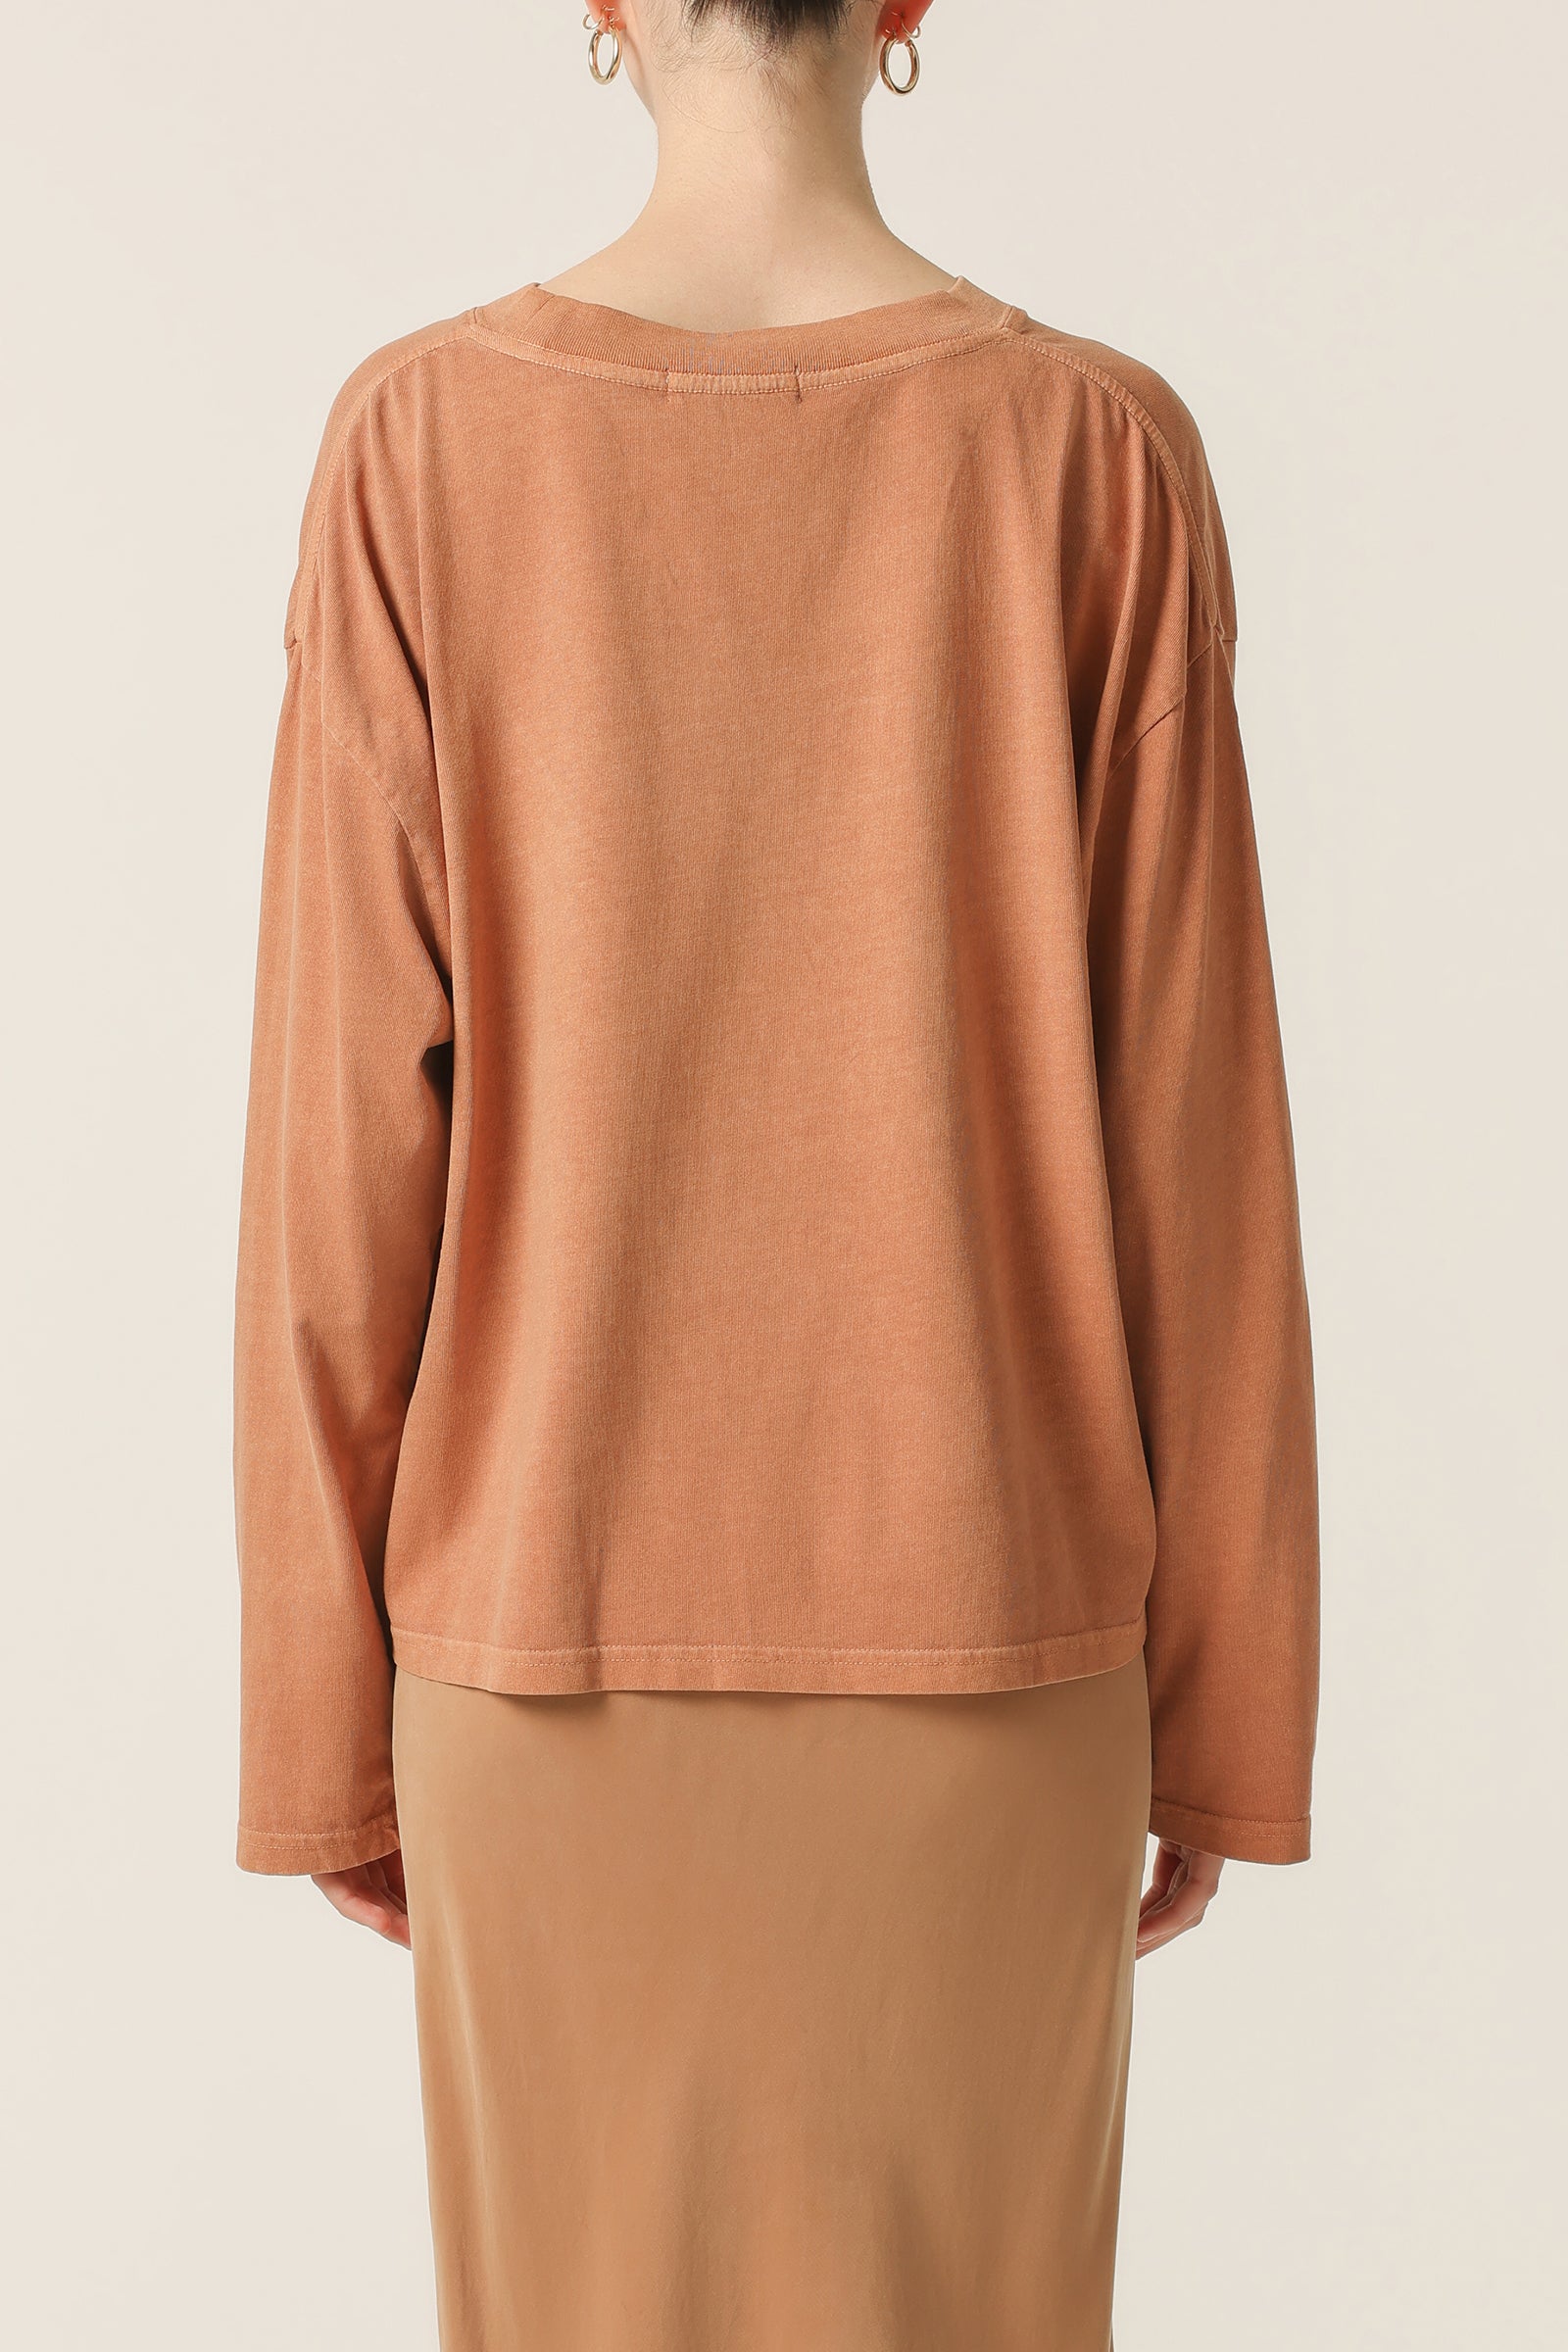 Nude Lucy Spence Organic Washed Tee In Maple 